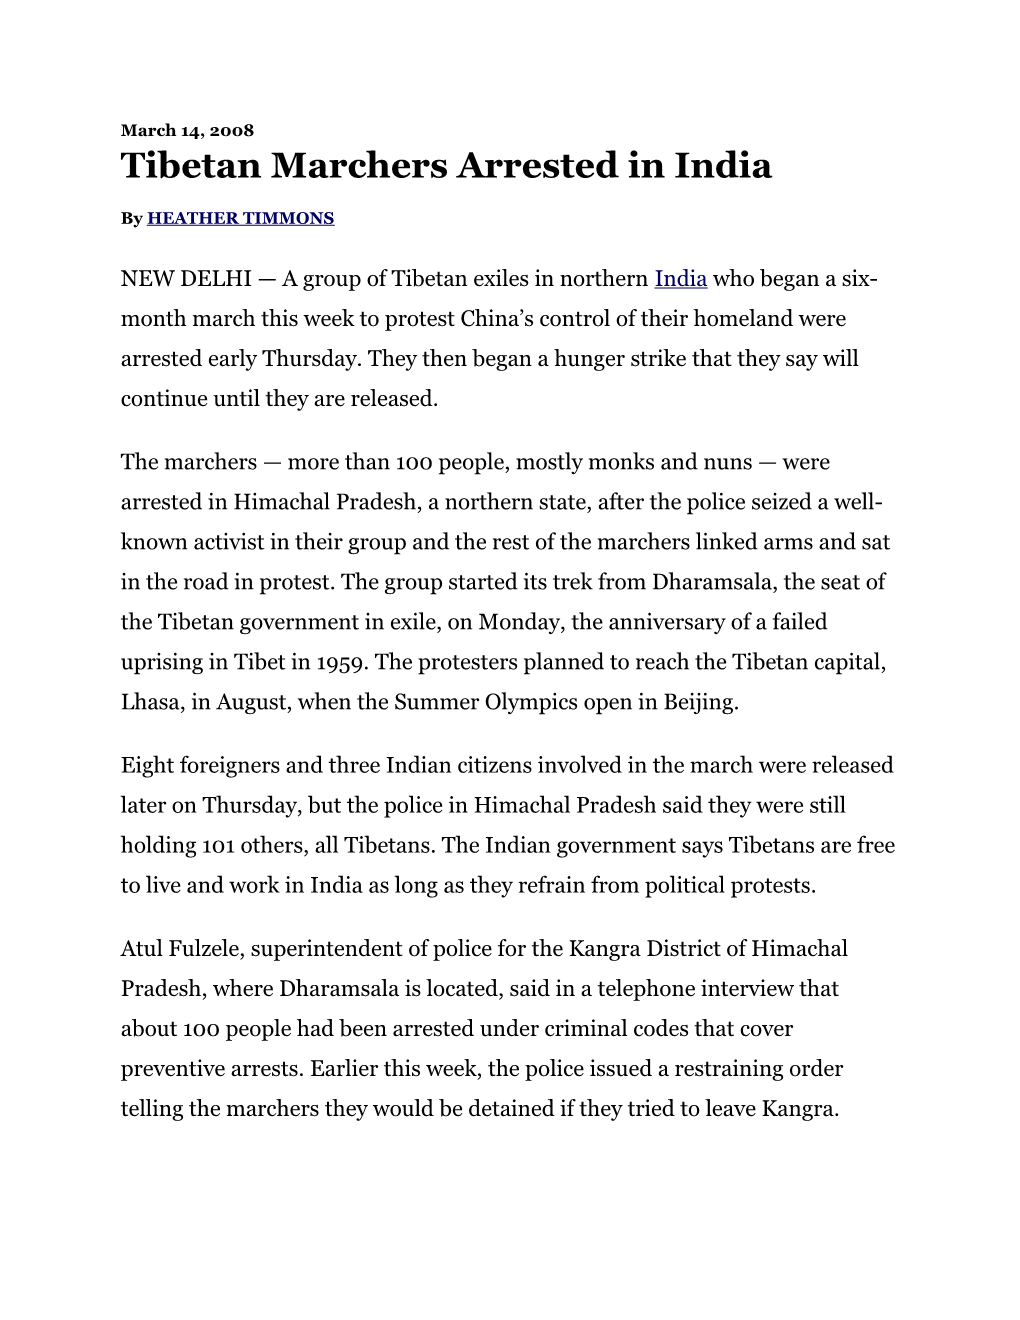 Tibetan Marchers Arrested in India